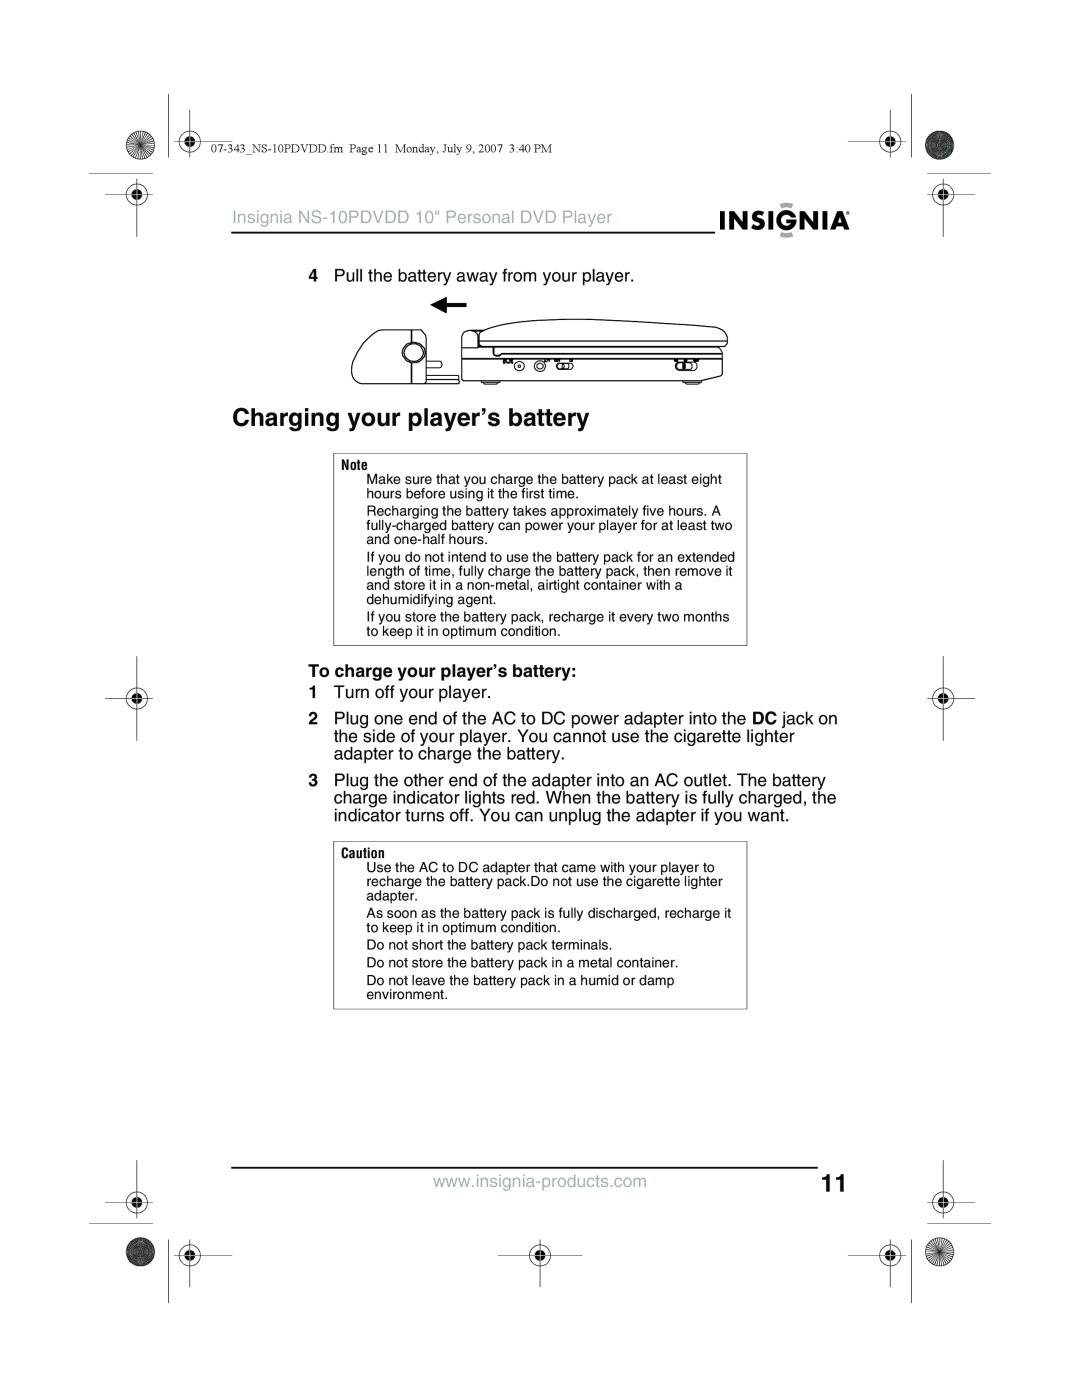 Insignia NS-10PDVDD manual Charging your player’s battery, To charge your player’s battery 